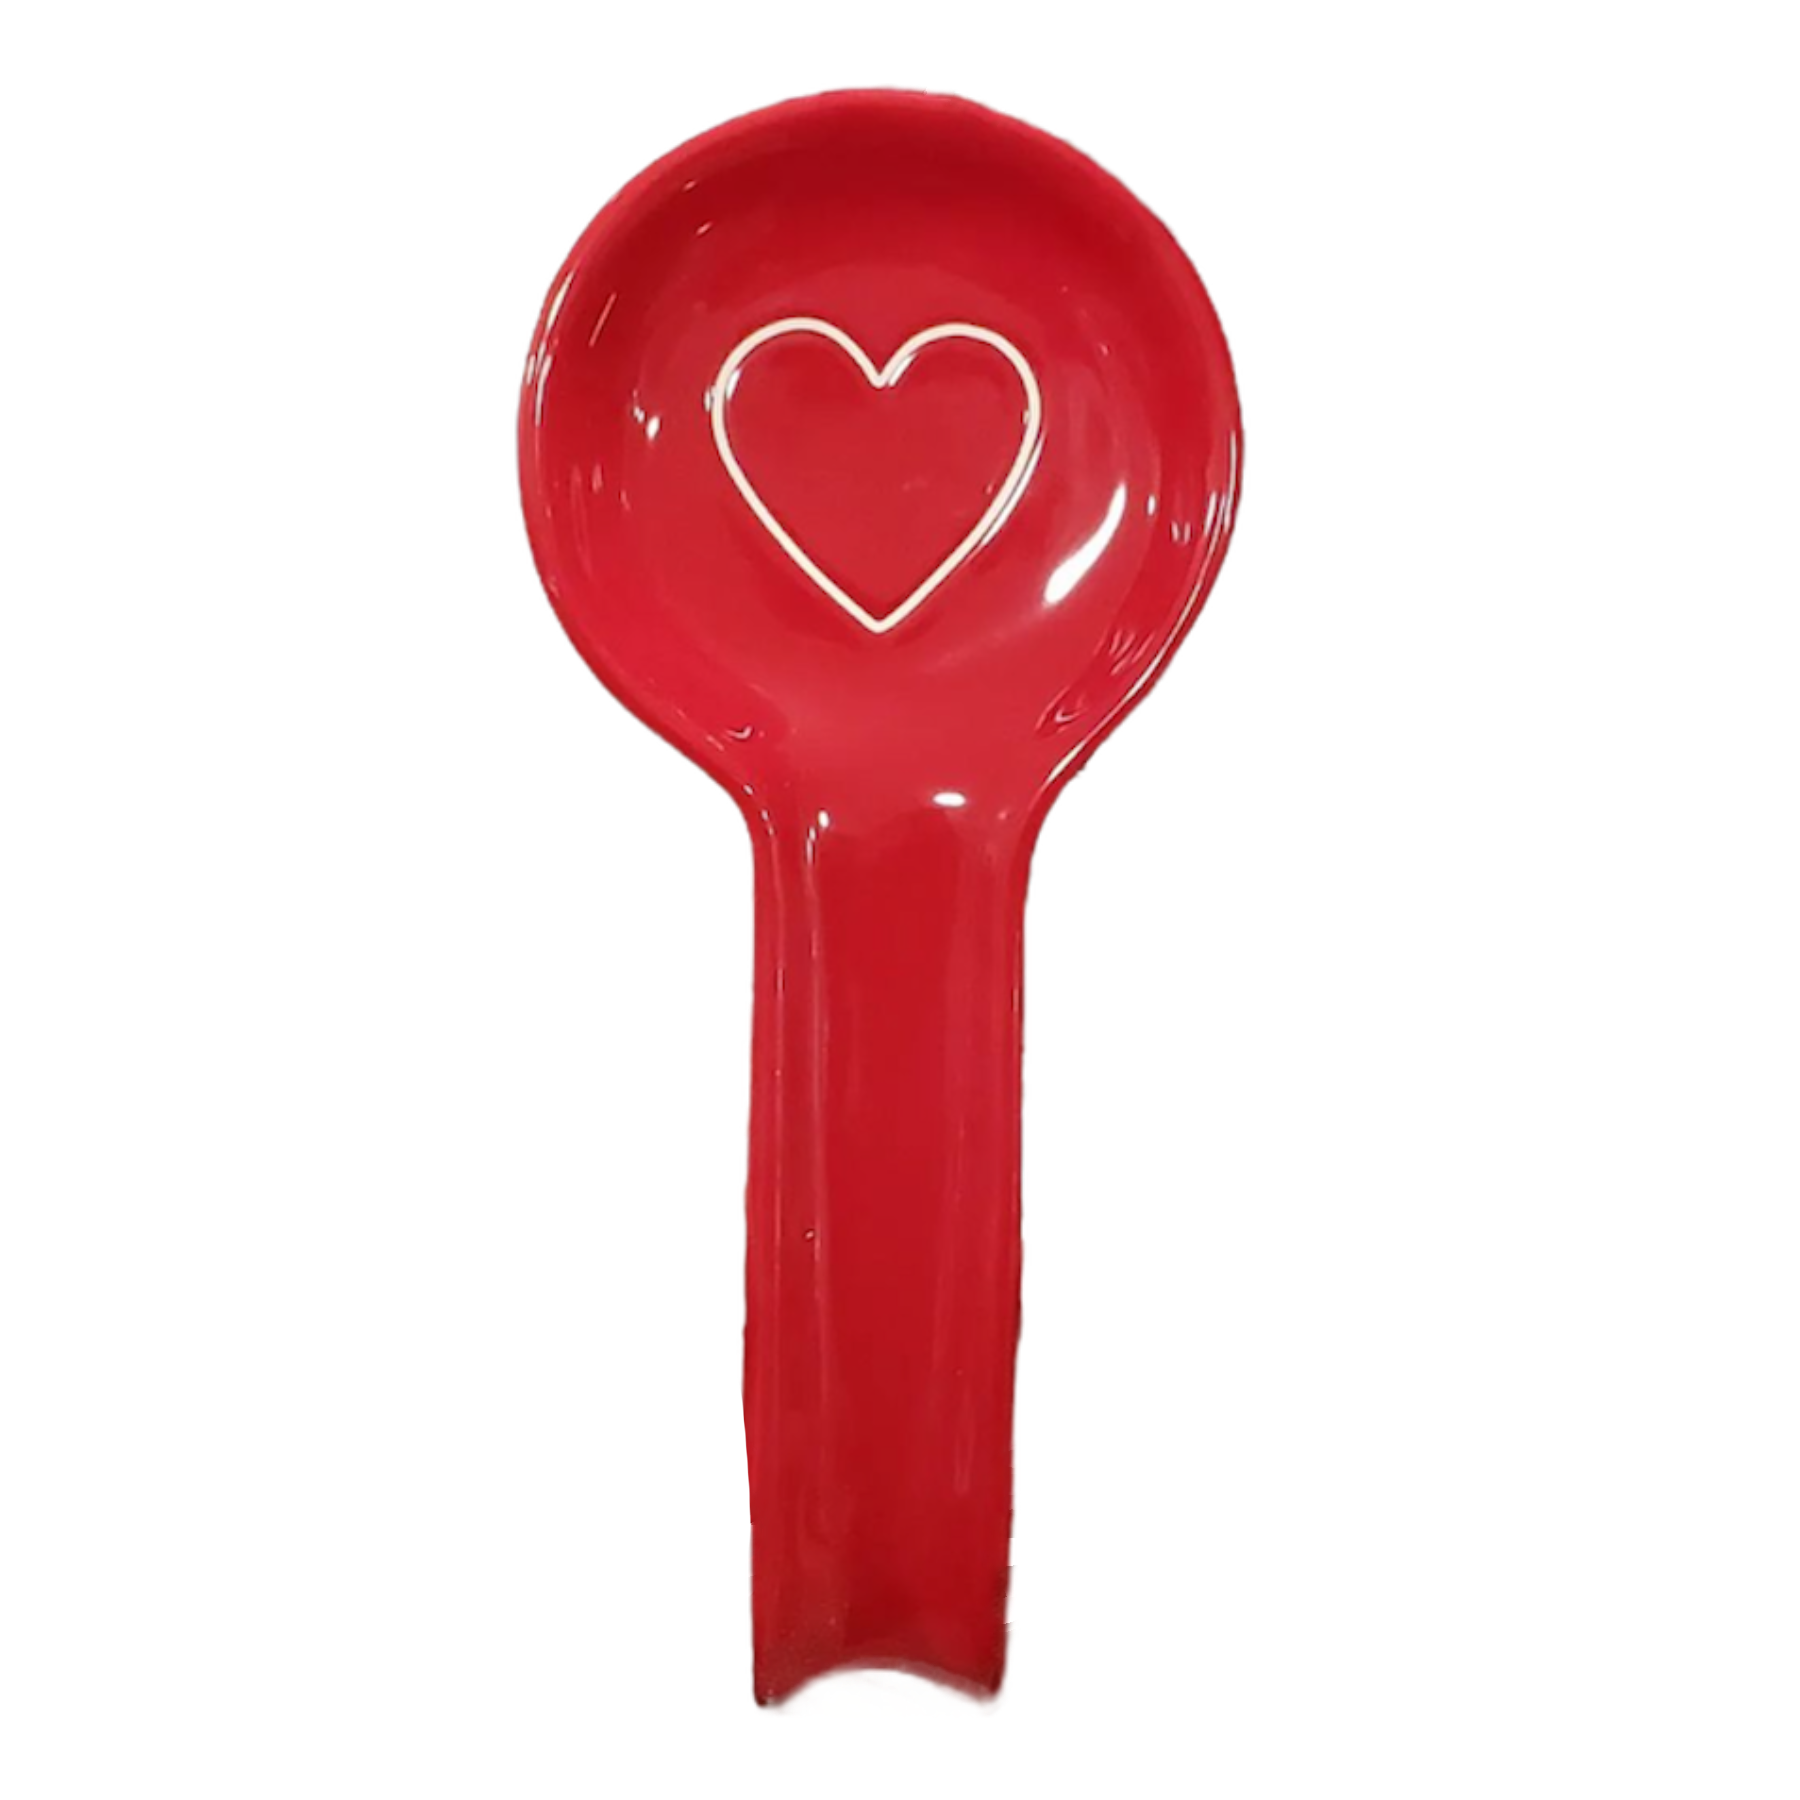 Funny Spoon Rest: Valentines Day or Custom Colors Available